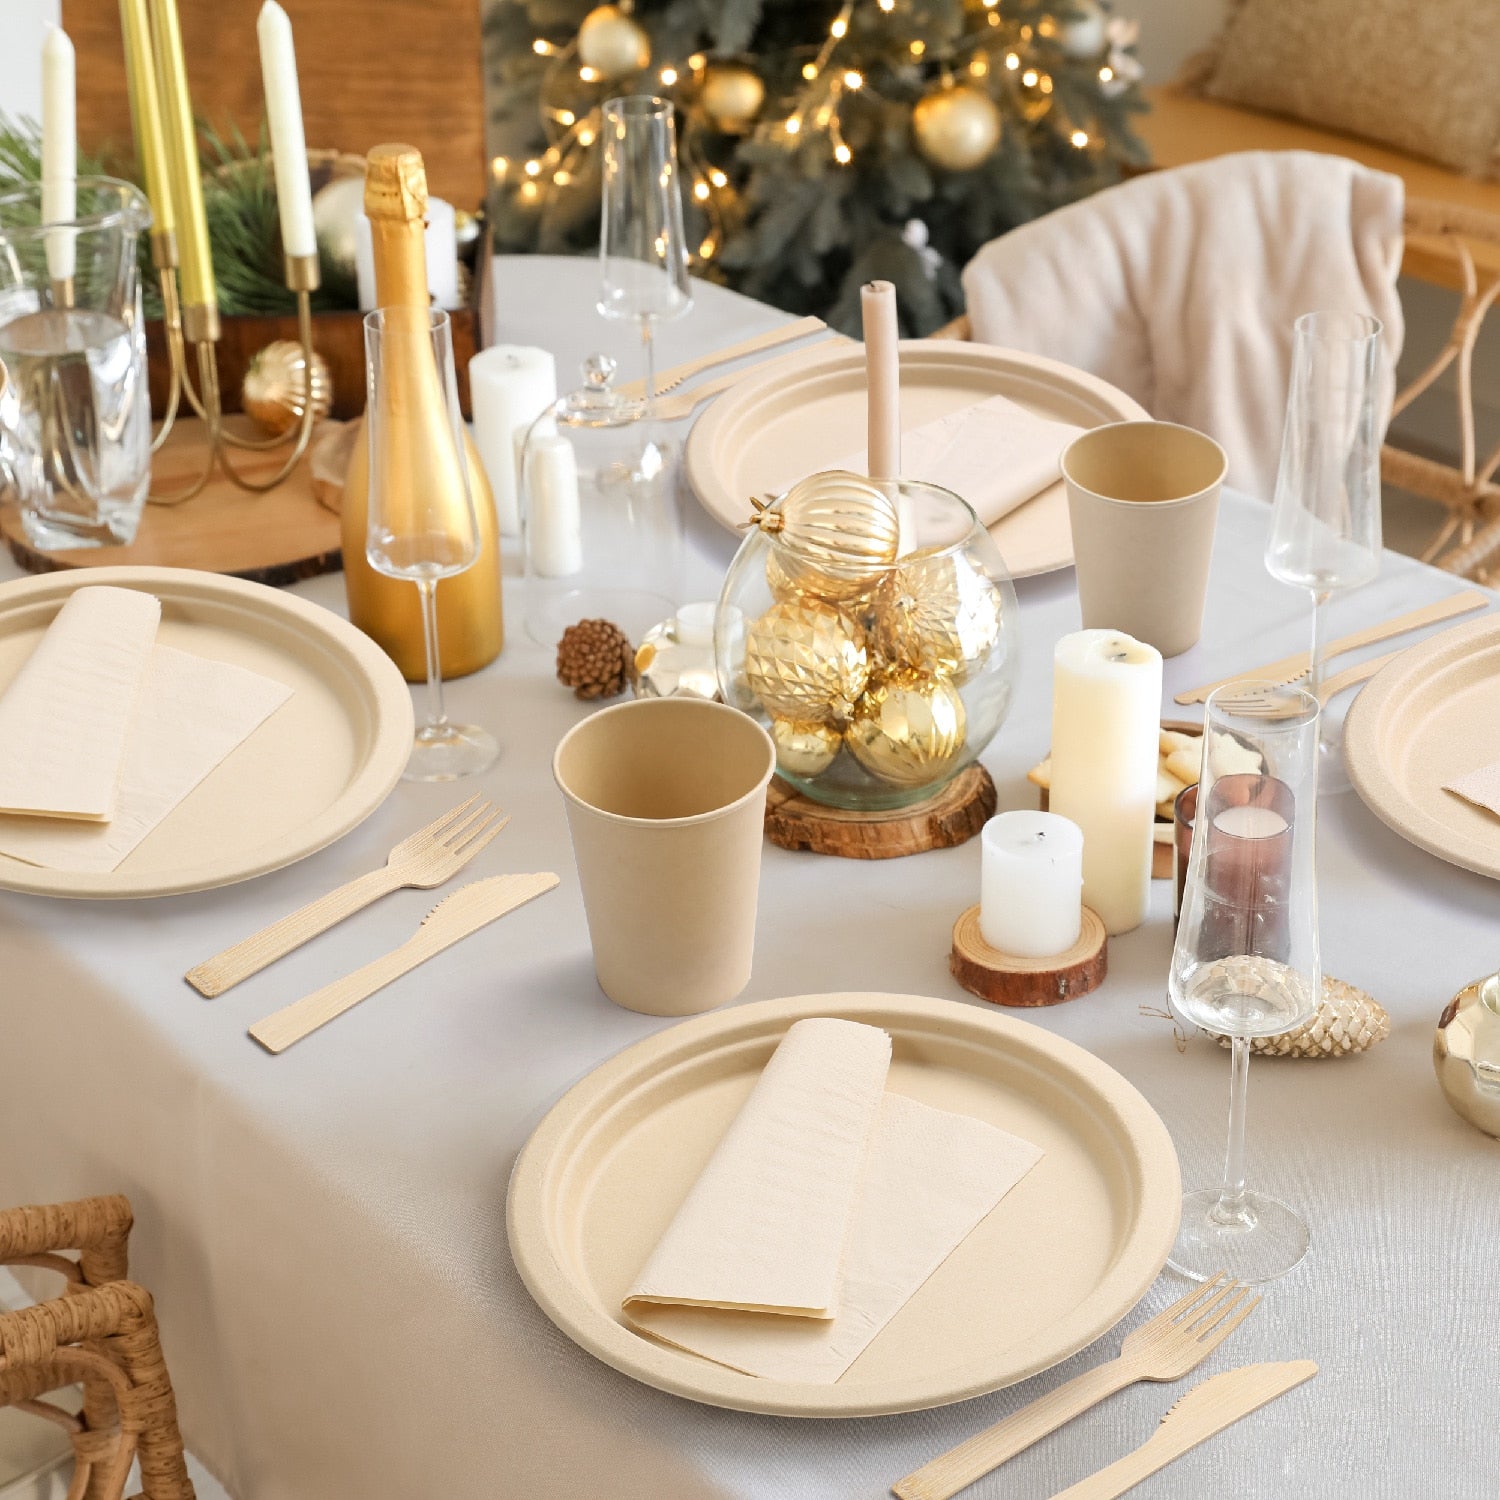 Disposable Tableware Set - Plastic-Free Bamboo Cutlery, Plates and Napkins. Eco-friendly disposable cutlery. 